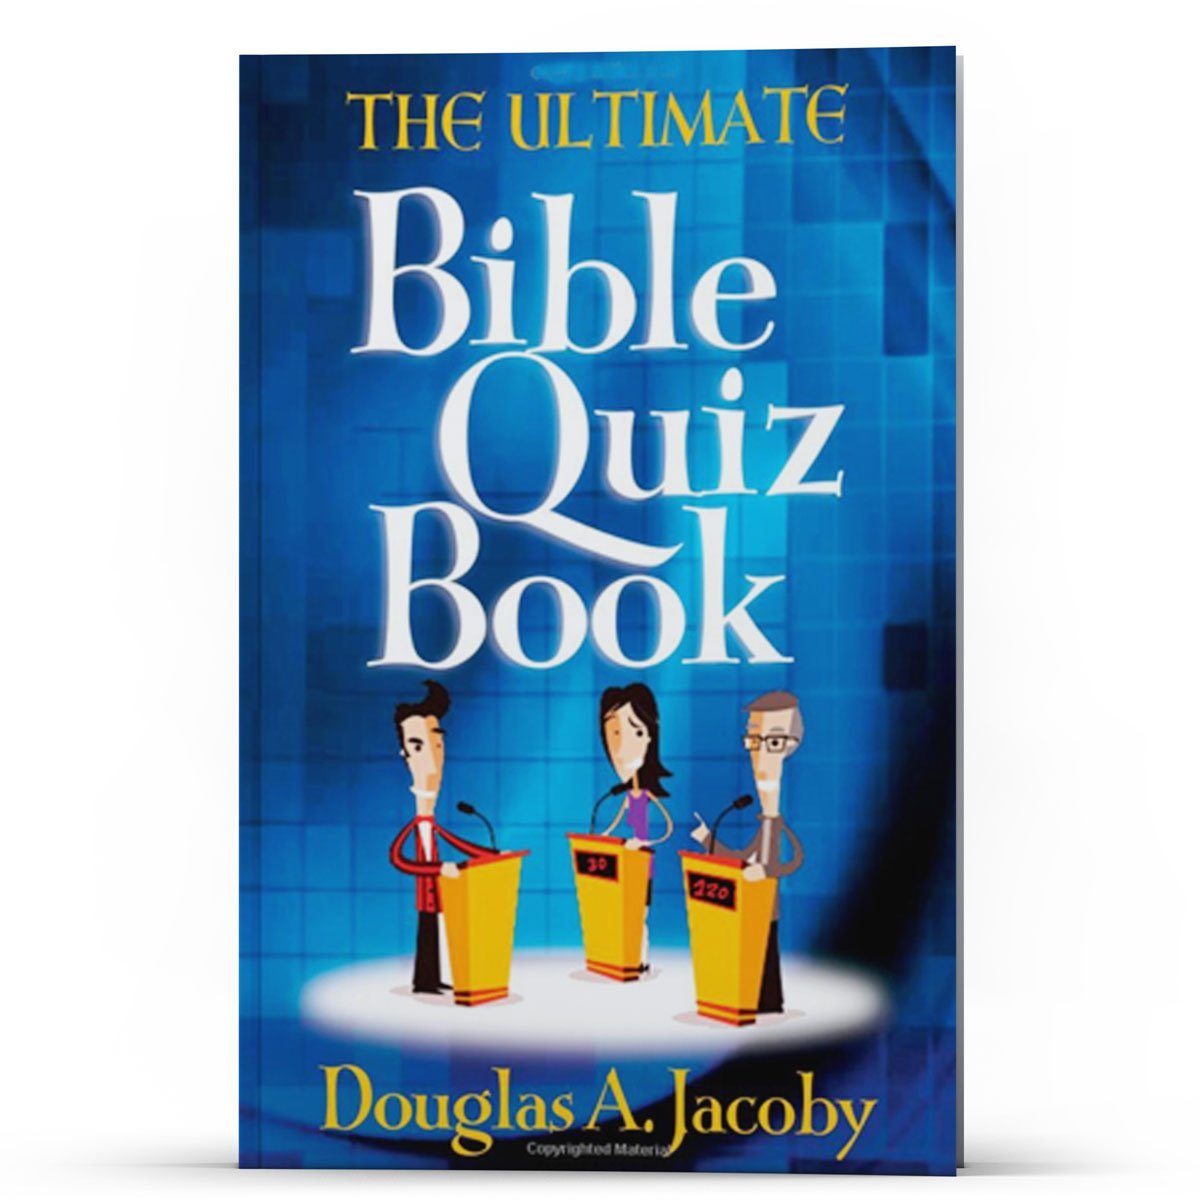 Bible Quiz Book with 109 quizzes covering all books of the Bible.